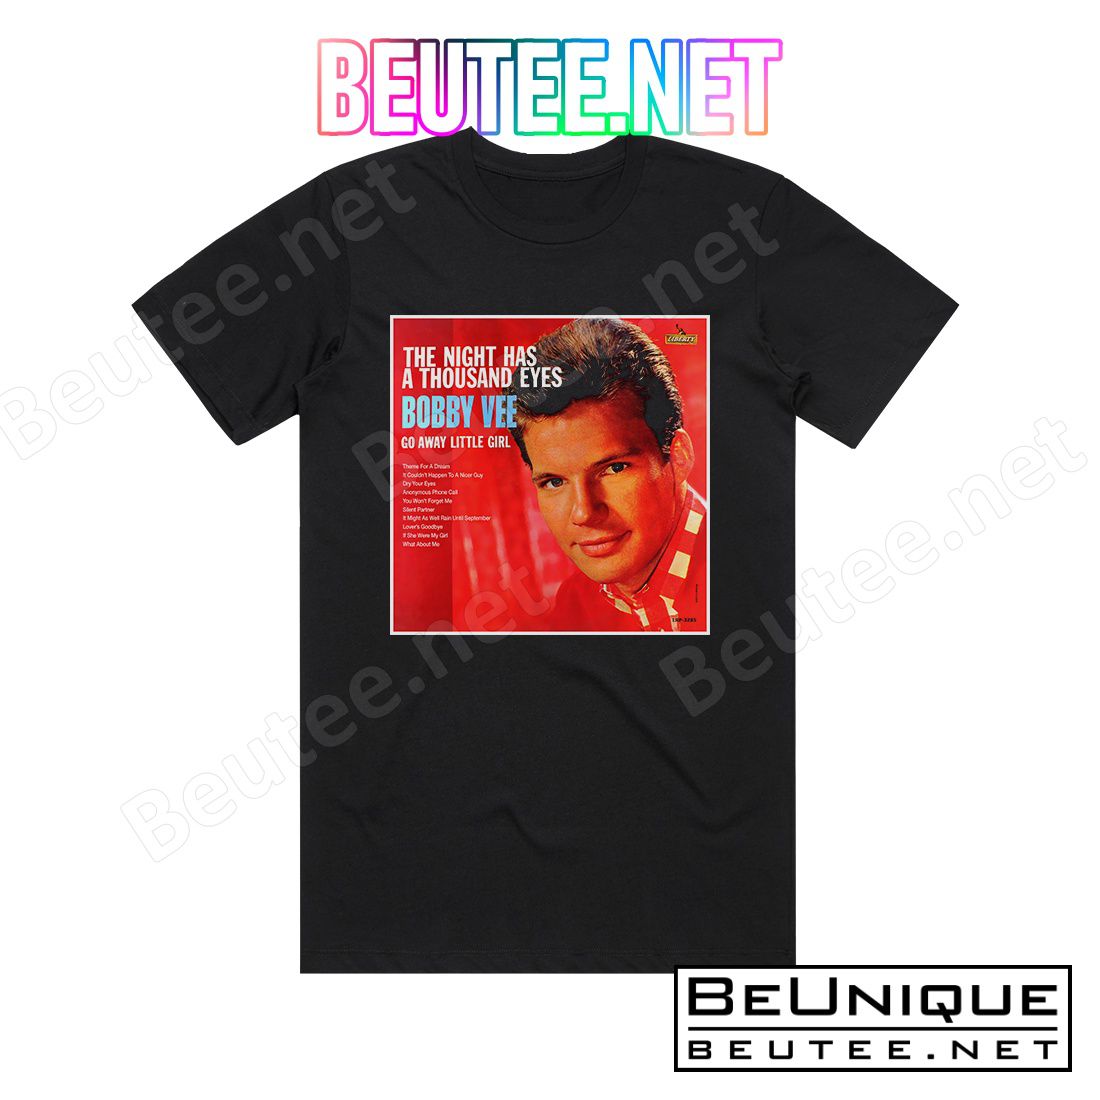 Bobby Vee The Night Has A Thousand Eyes Album Cover T-Shirt